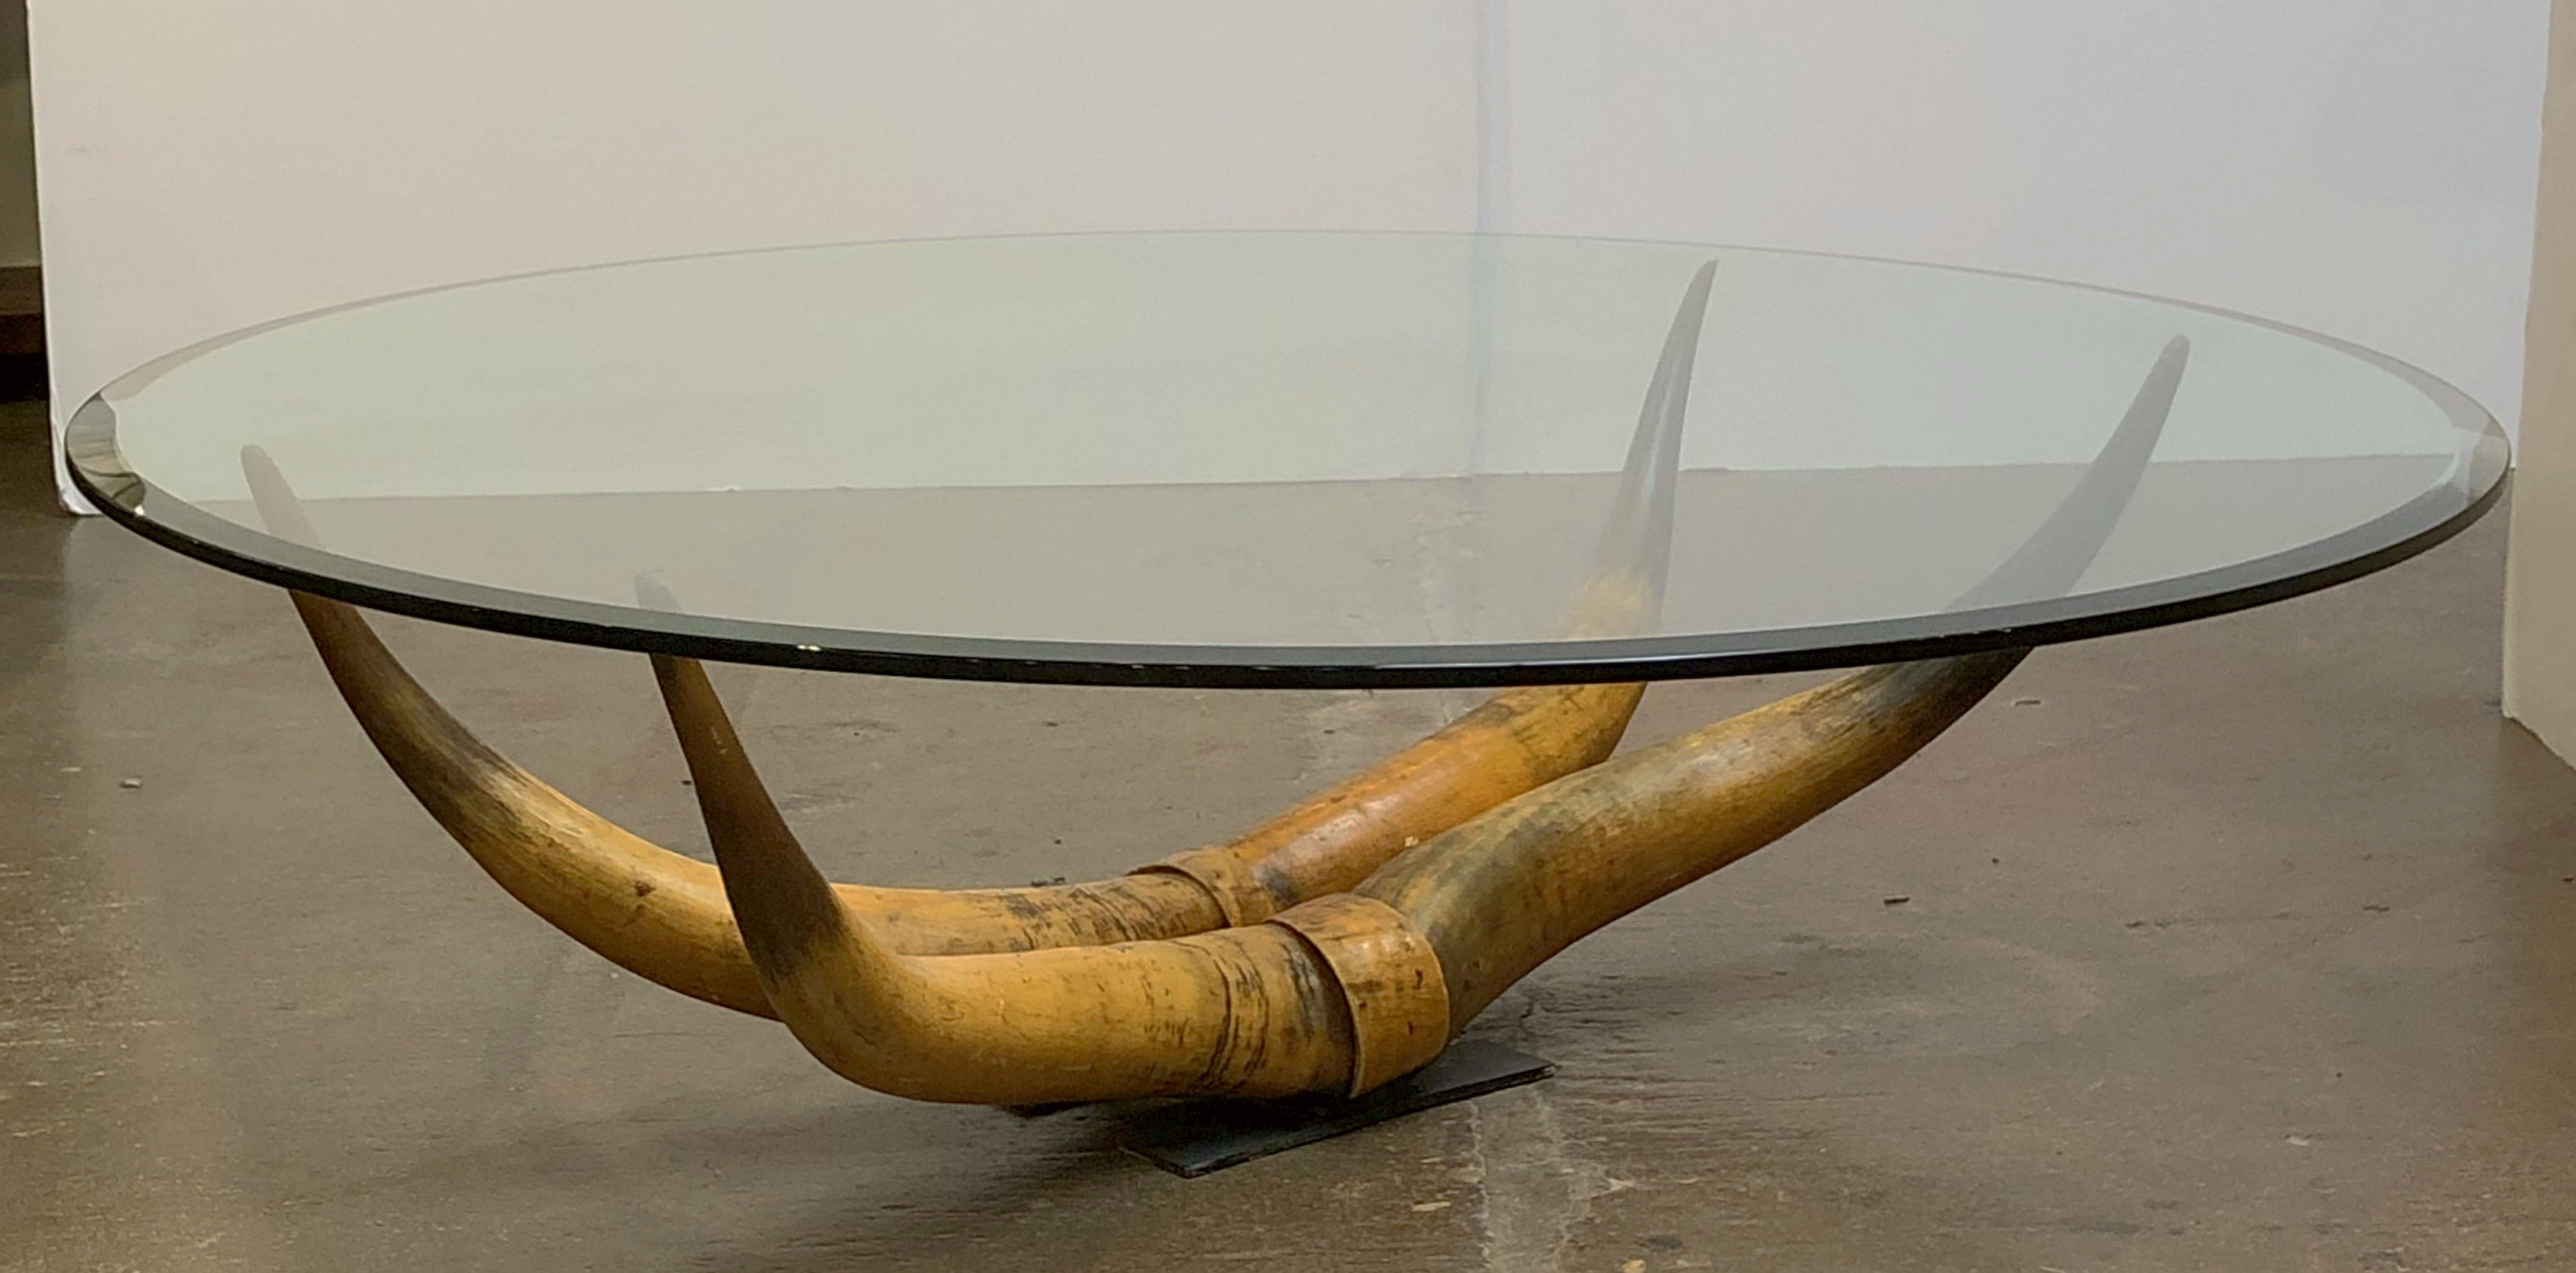 A fine French low table featuring a round or circular beveled glass top set upon a steer Horn rack mounted to a metal plate base.

Perfect for use as a coffee or cocktail table.

Dimensions: Height 14 3/4 inches x diameter 48 inches.